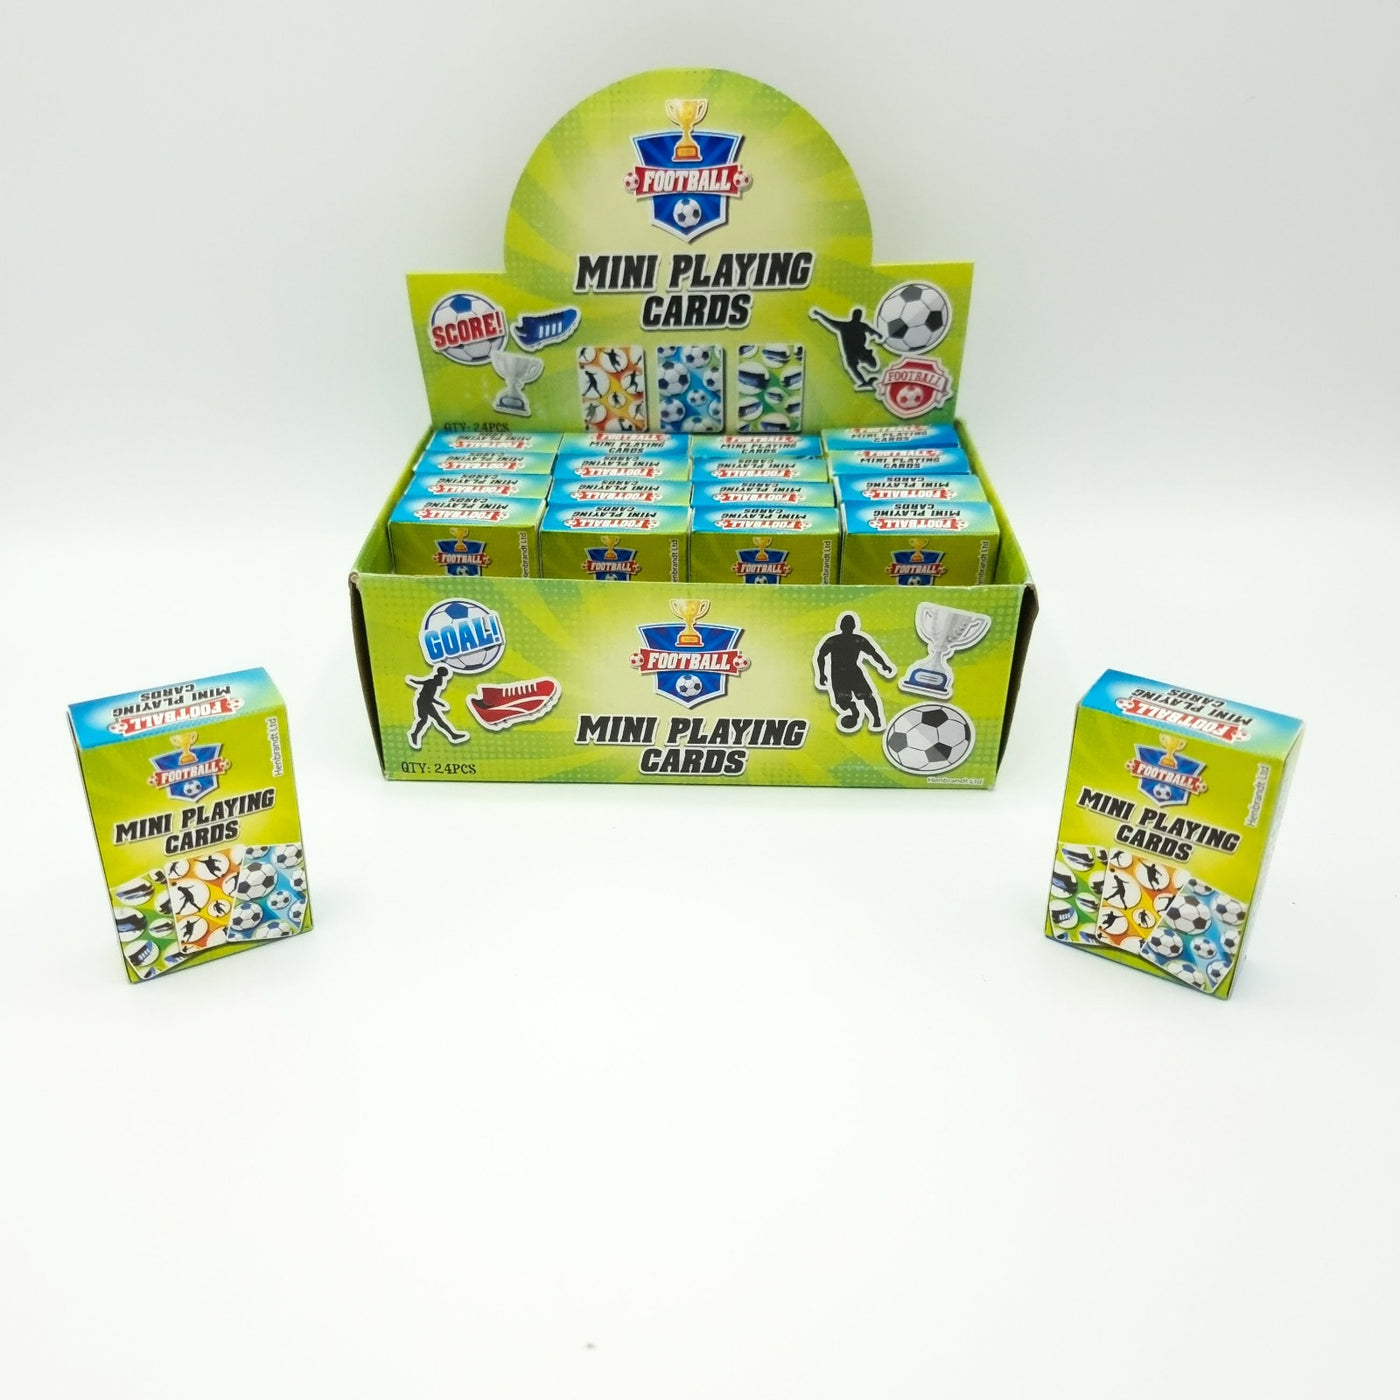 Pre-filled Boys And Girls Party Football Goody Bags In Mini Vintage Jars With Football Socks, Sweets And Toys,